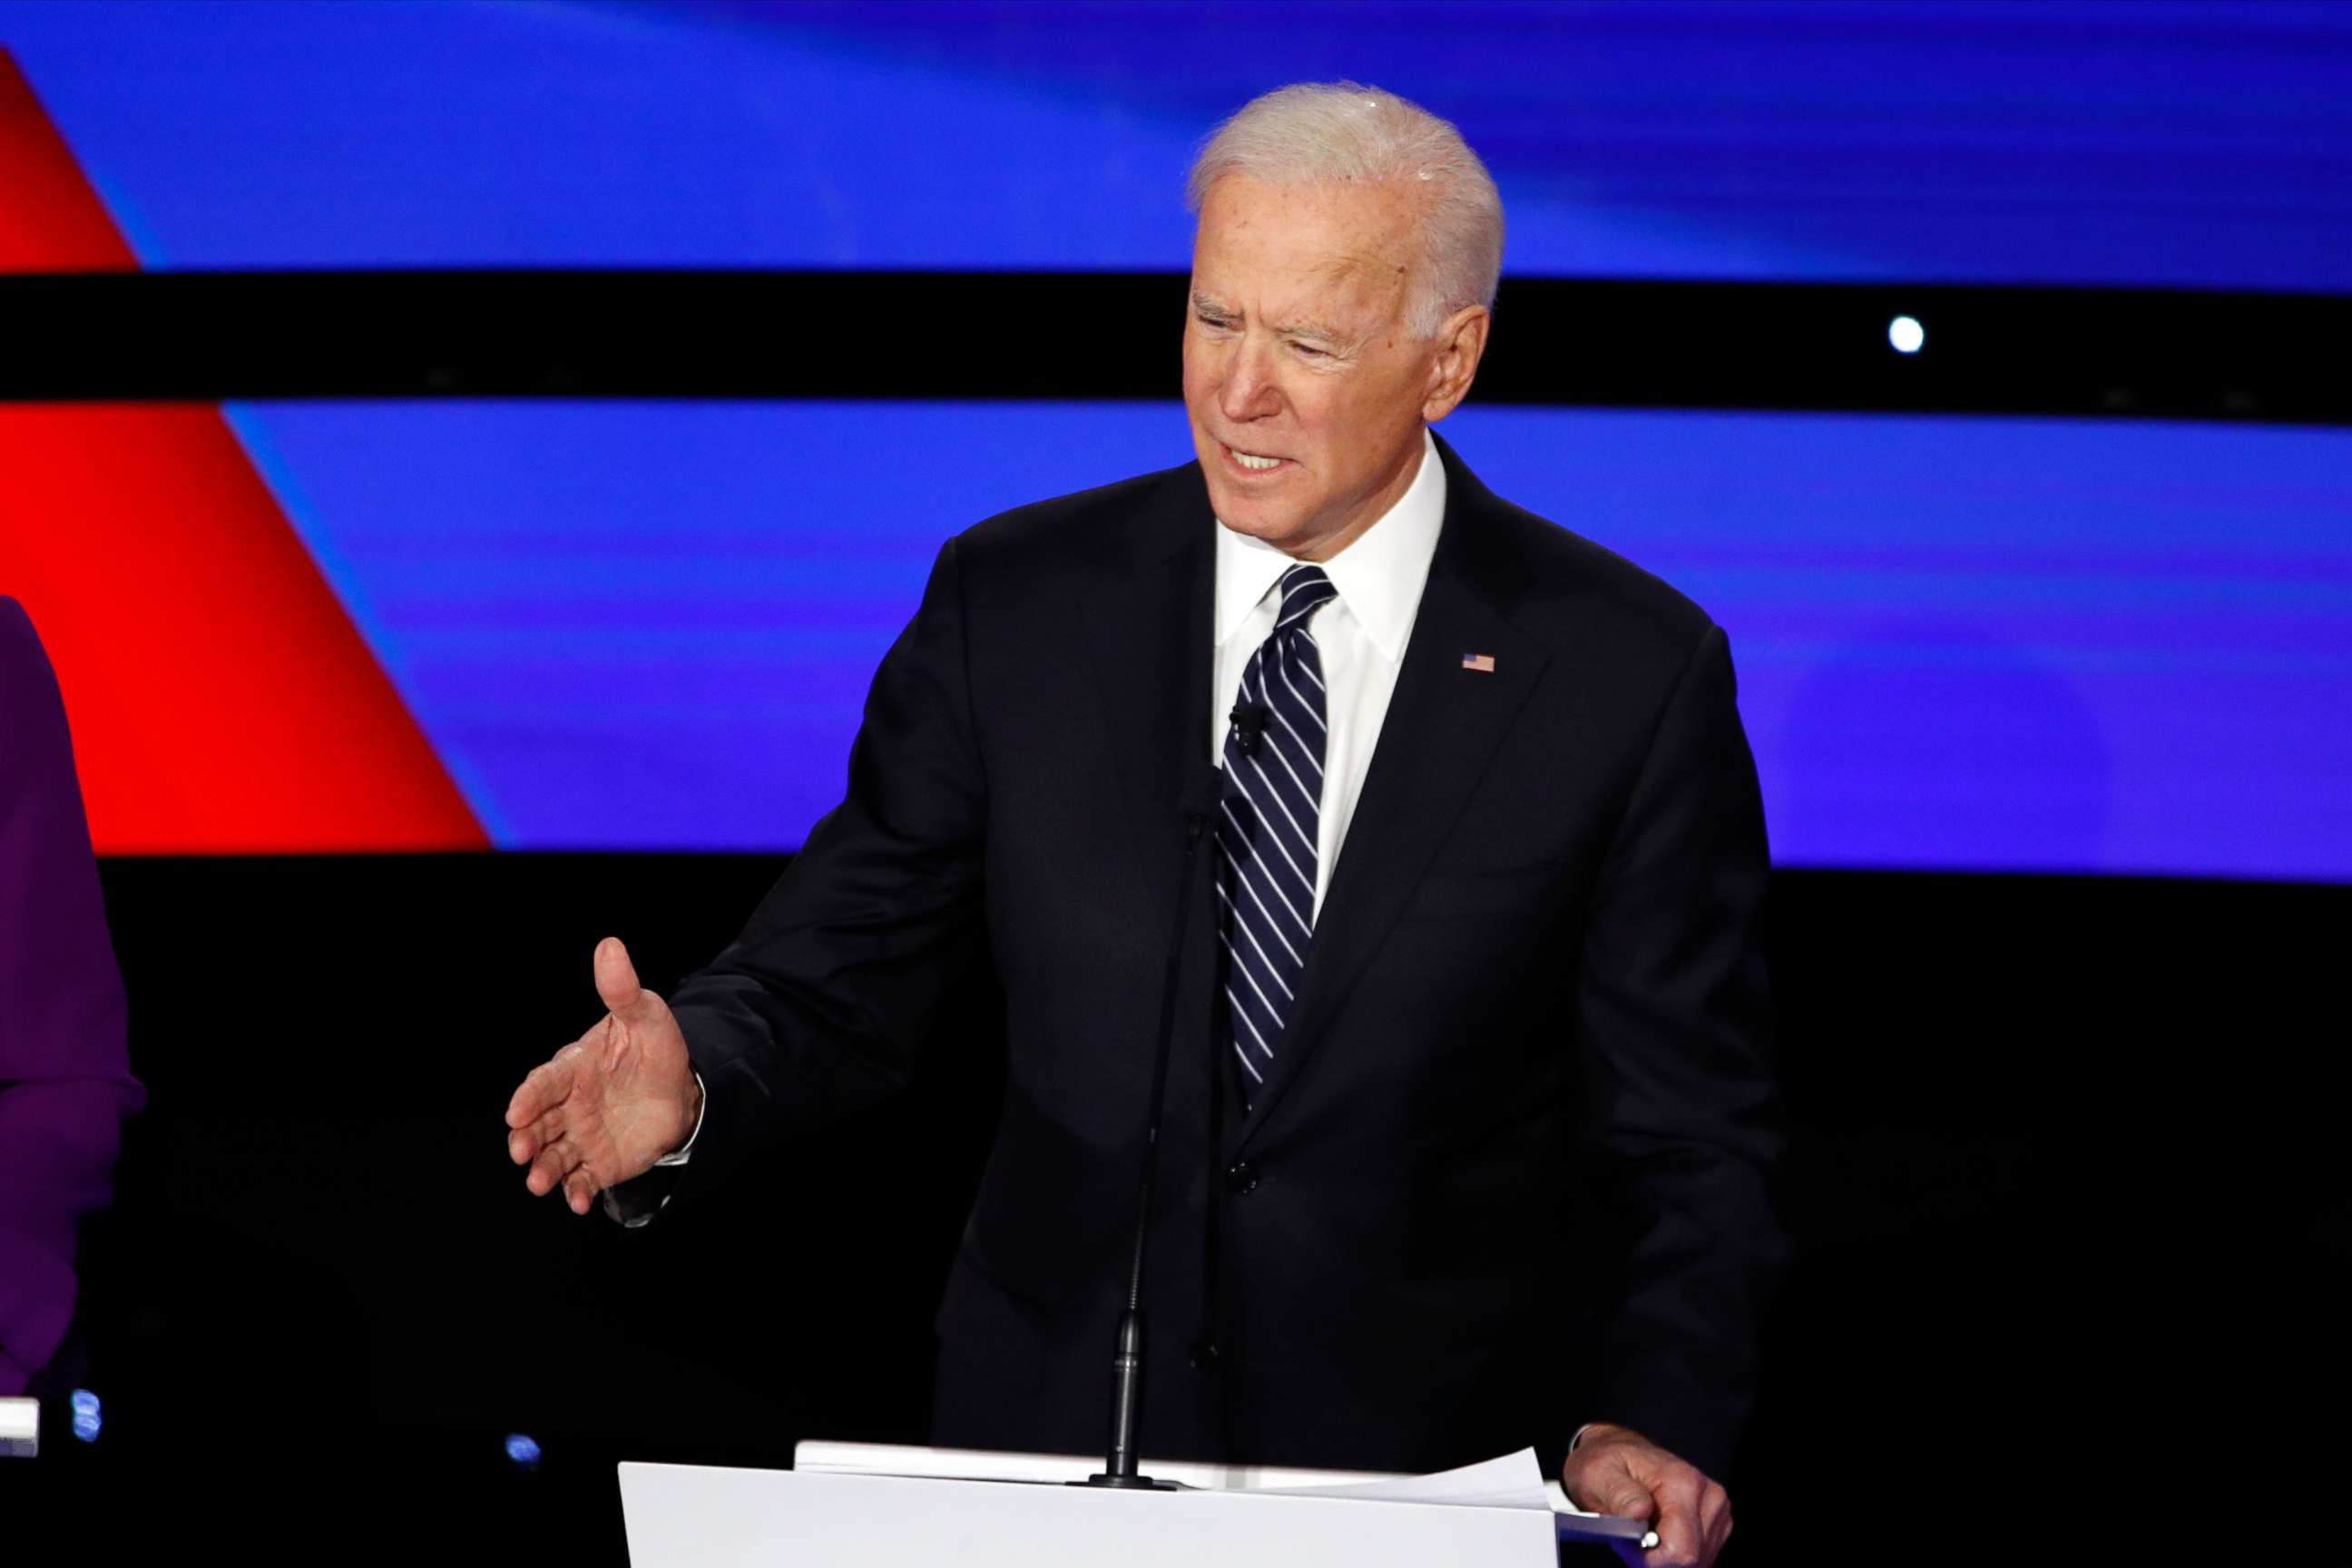 PHOTO: Former Vice President Joe Biden speaks during a Democratic presidential primary debate hosted by CNN and the Des Moines Register in Des Moines, Iowa, Jan. 14, 2020.